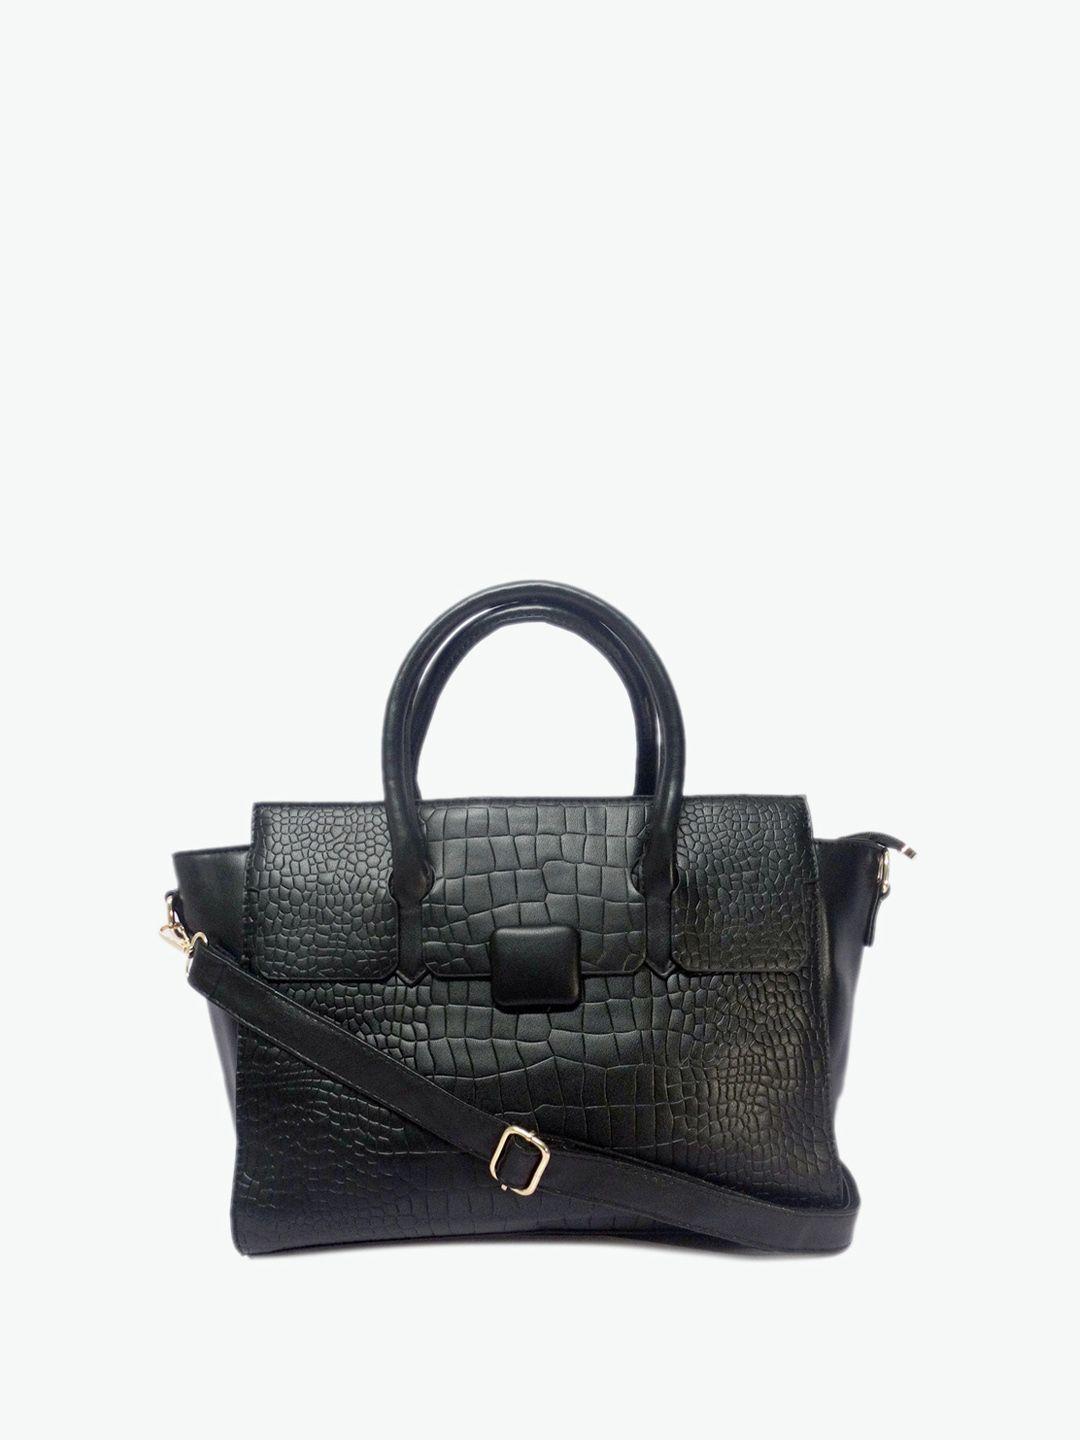 chronicle textured structured satchel